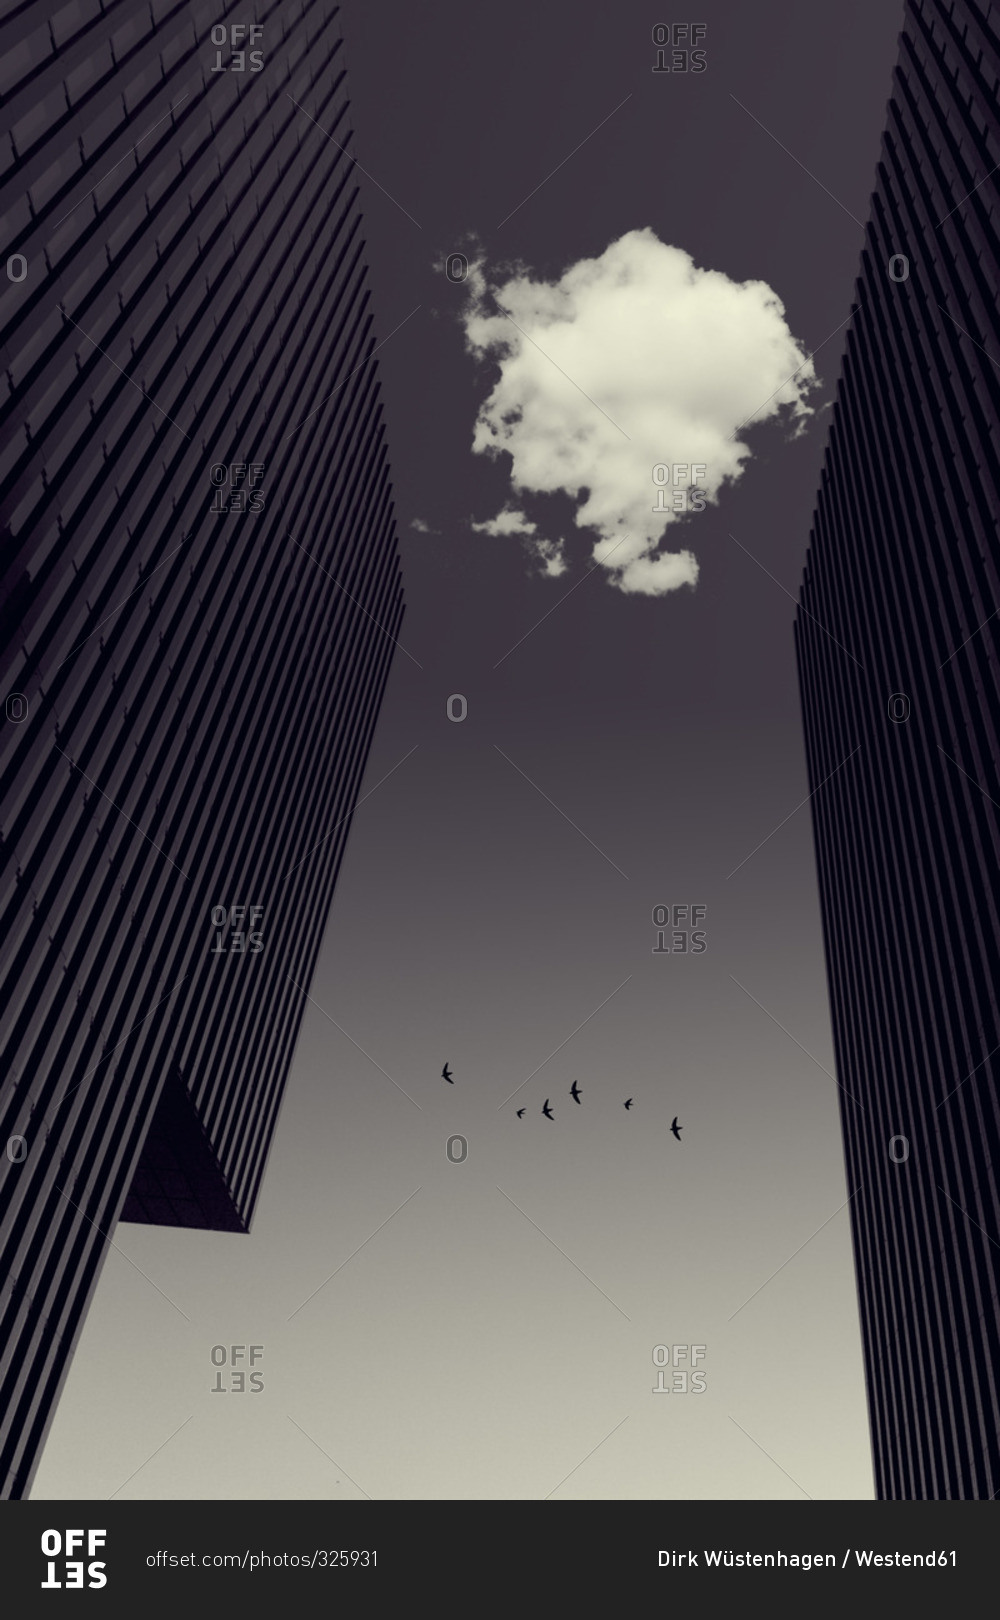 Cloud between office towers and flying birds